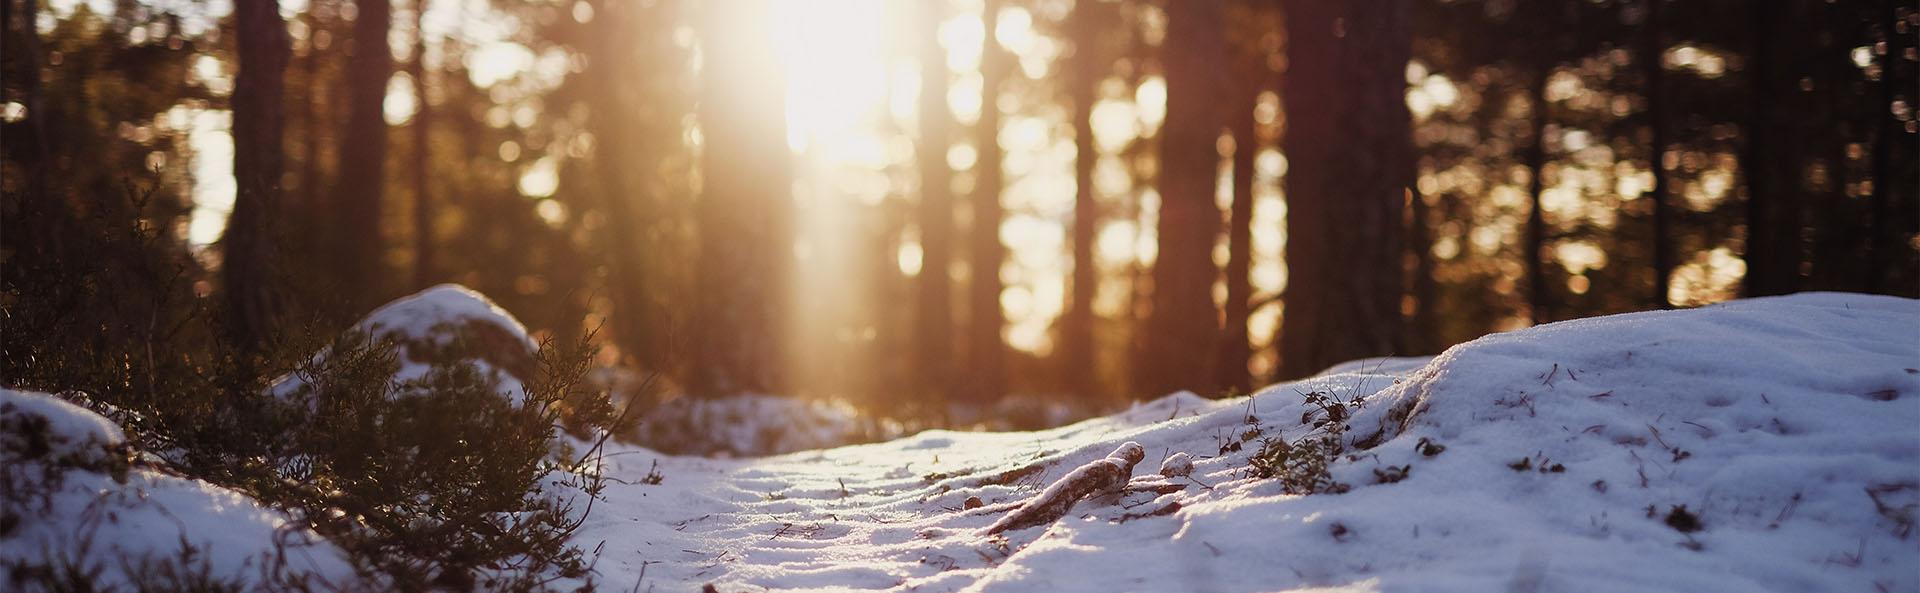 10 Winter Tips for Staying Mentally and Physically Healthy